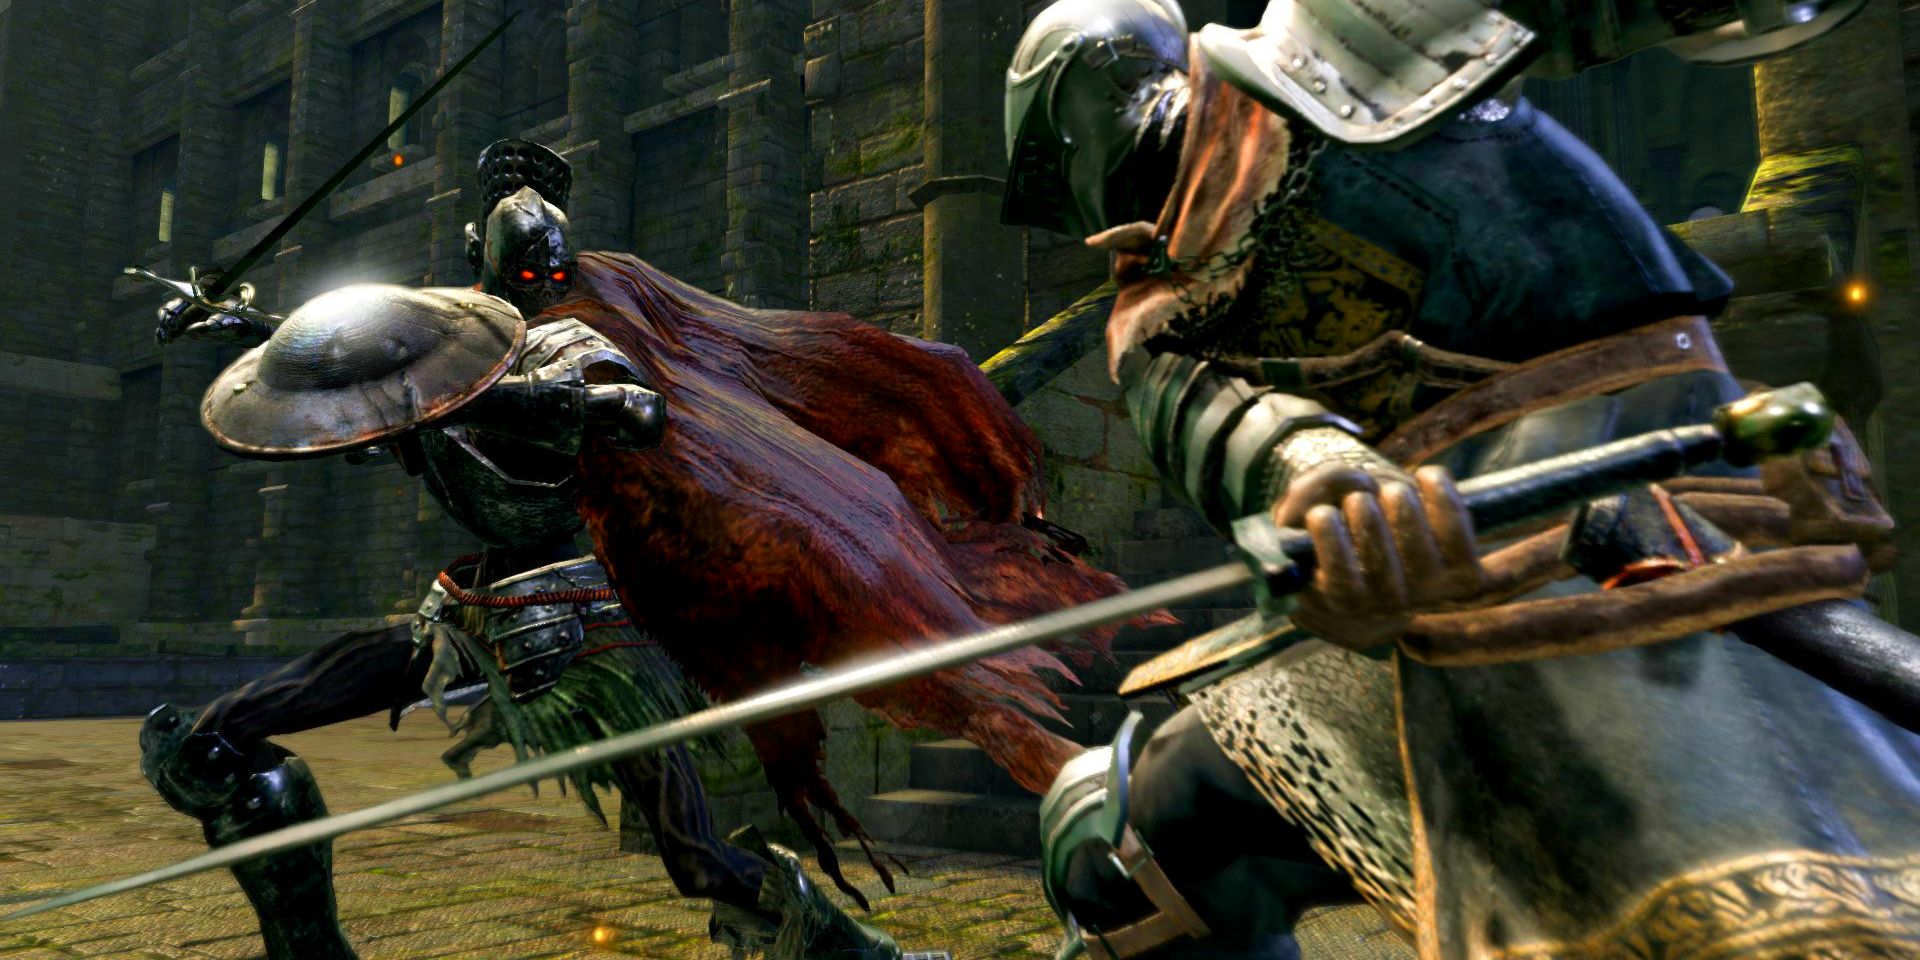 art of a player in elite knight armor fighting a balder knight with a longsword.